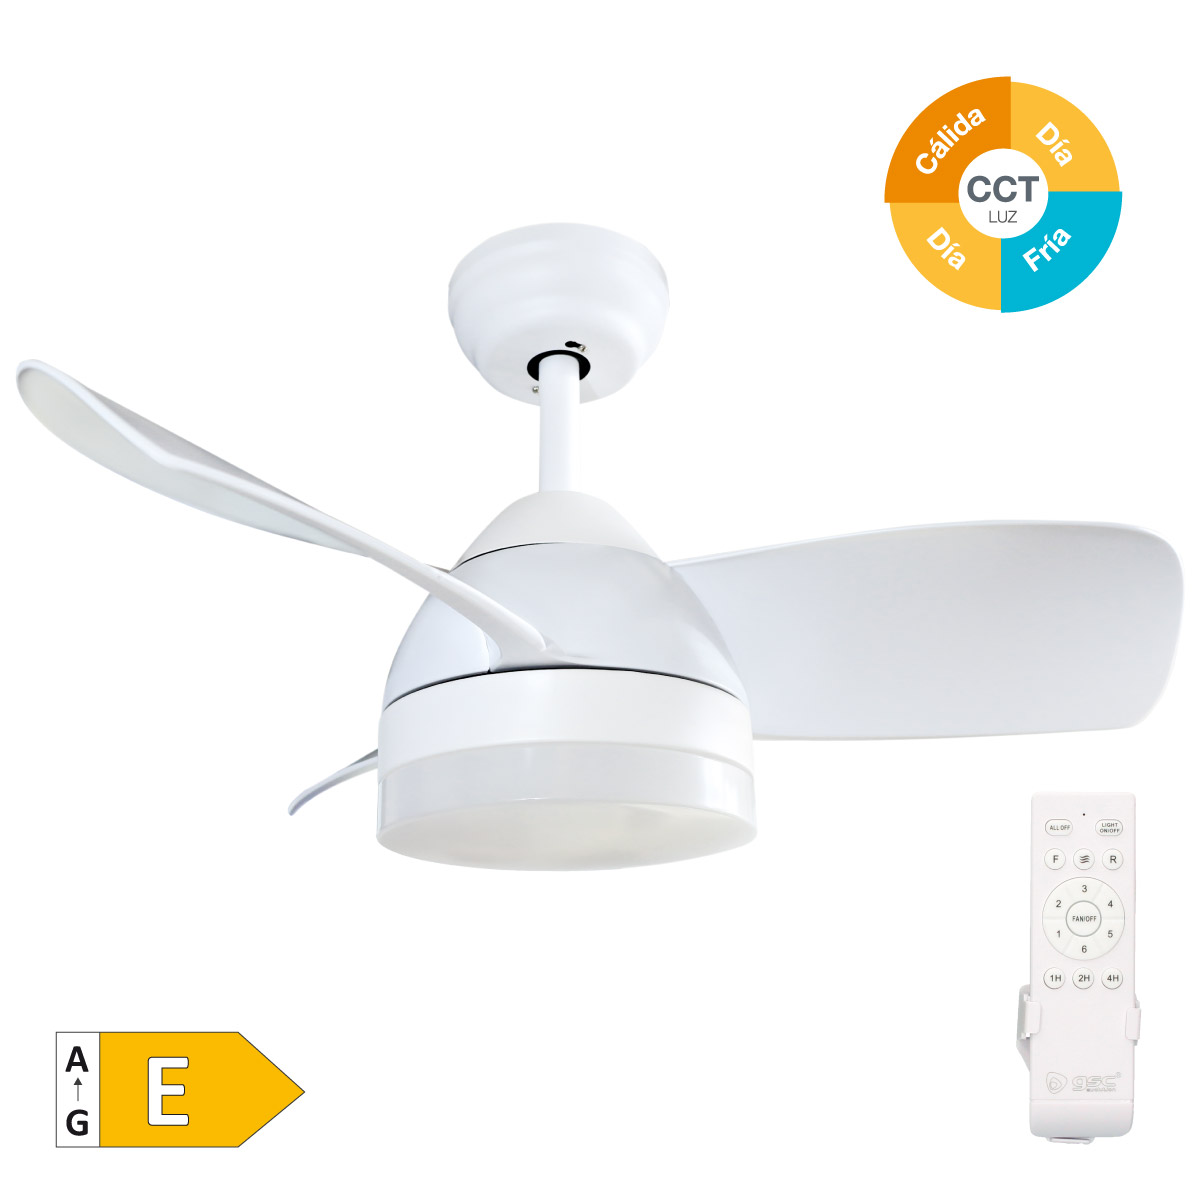 Namuno 28' ceiling fan with remote control CCT 3 blades White